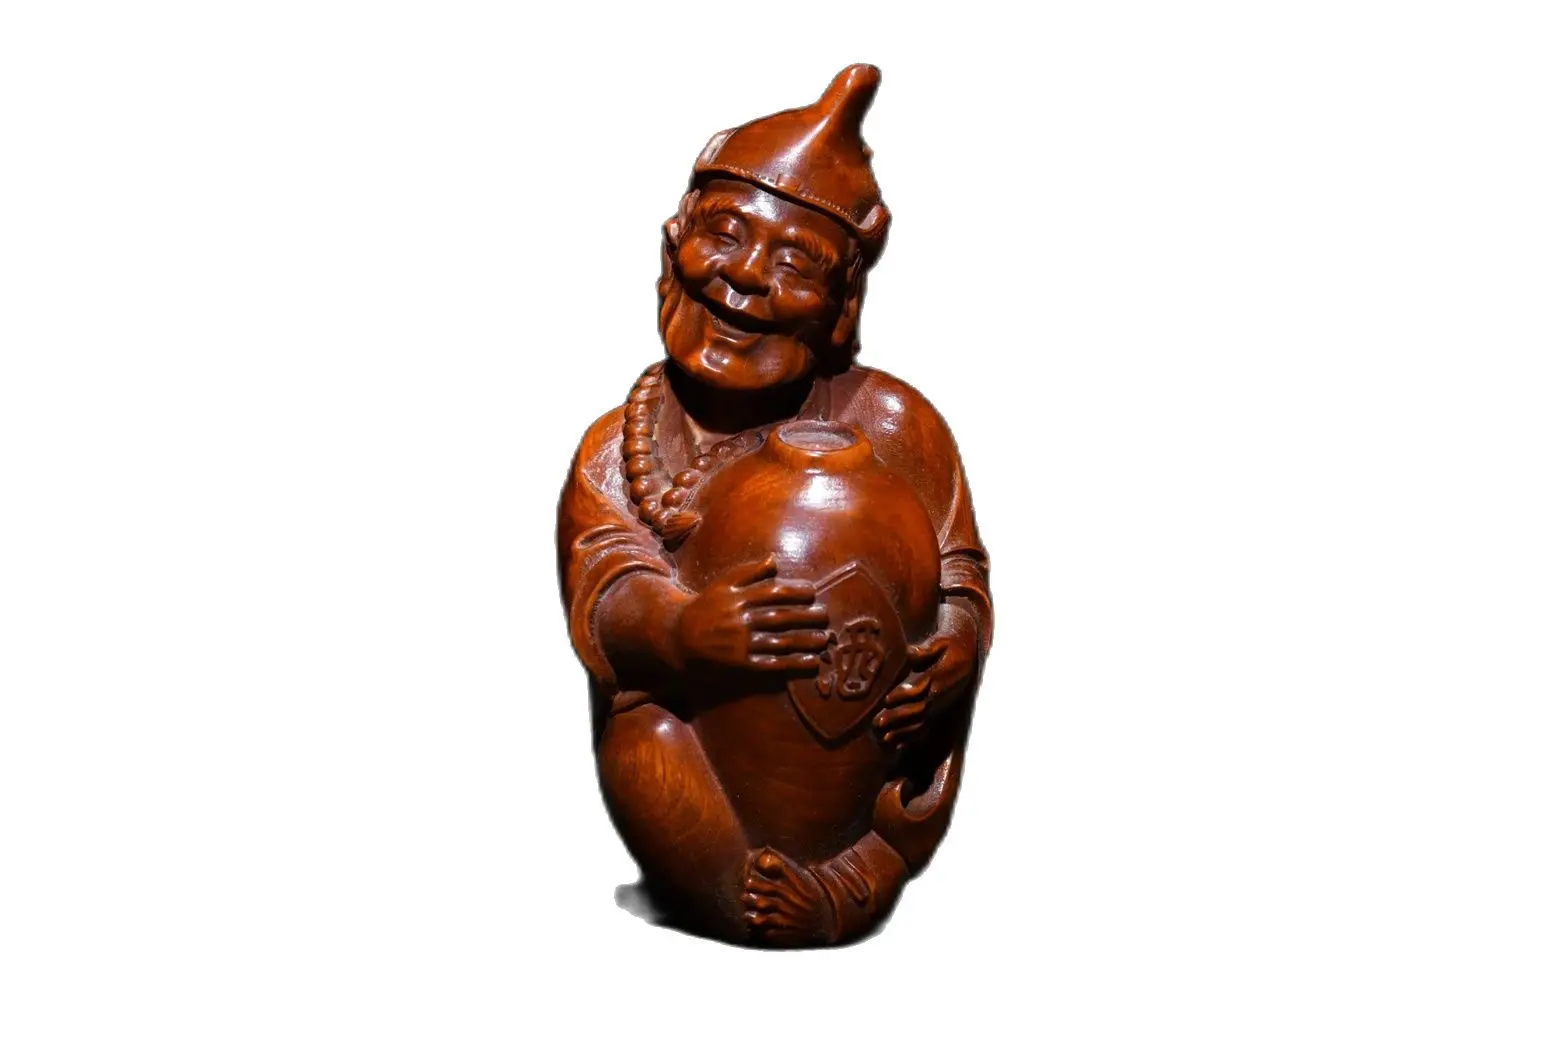 

Chinese Antiques Vintage Boxwood Carved Exquisite Ji Gong Buddha Statue Collection Sculpture Nice Art Gift Wooden Figurines